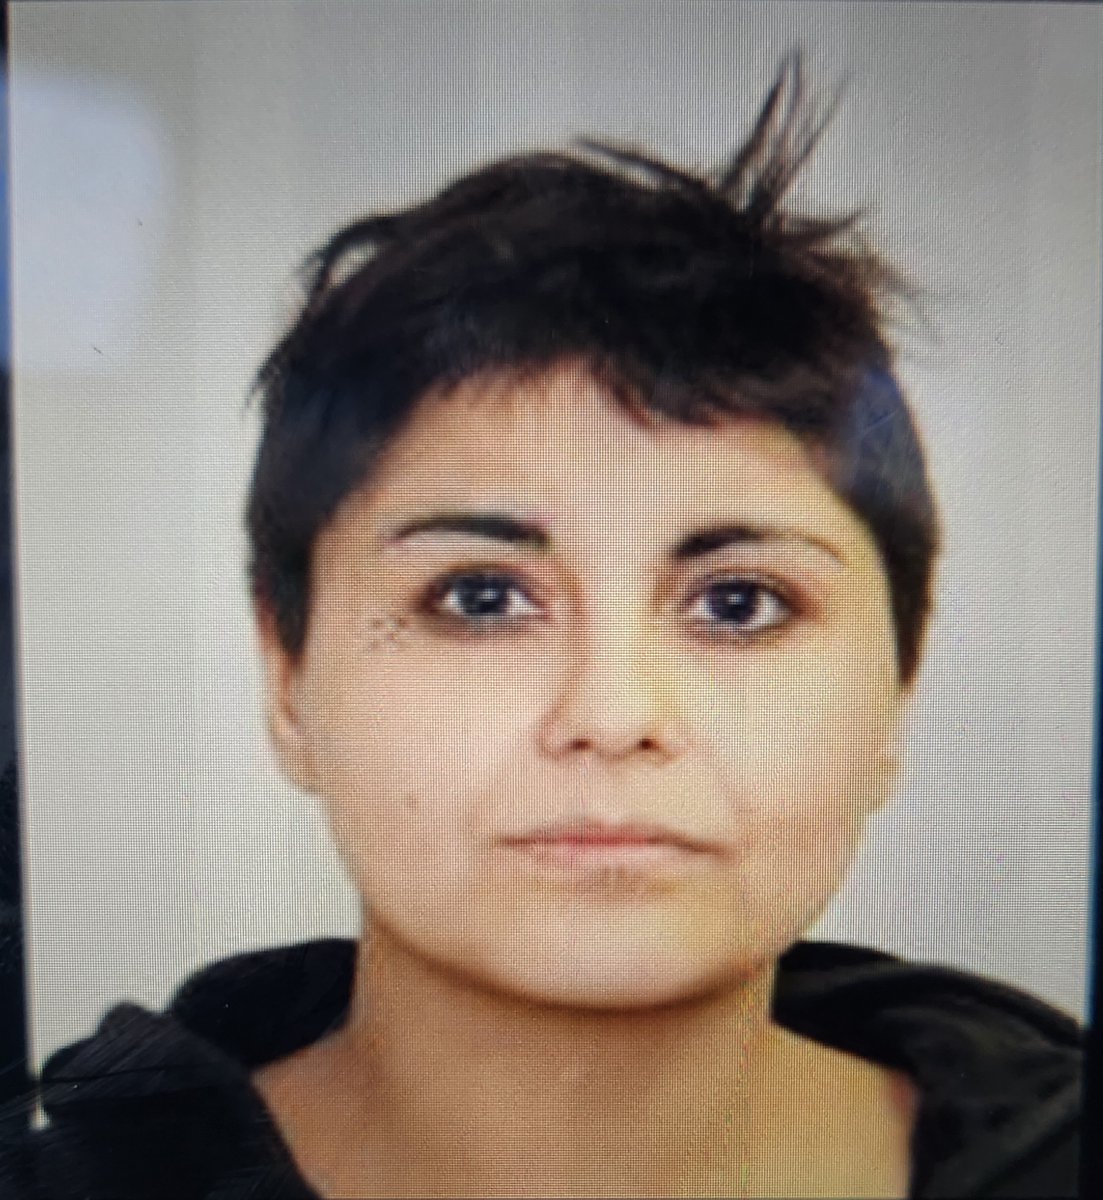 Missing woman in #BuffaloLake, AB: Candace Mineault (35 y/o) was last seen April 25. RCMP say she has ties to #ymm #GPAB and goes by Minnow or Candy. She's 5'7, 161 lbs, has brown hair and brown eyes. Was wearing white shirt, black pants, gray running shoes, w/pink suitcase.